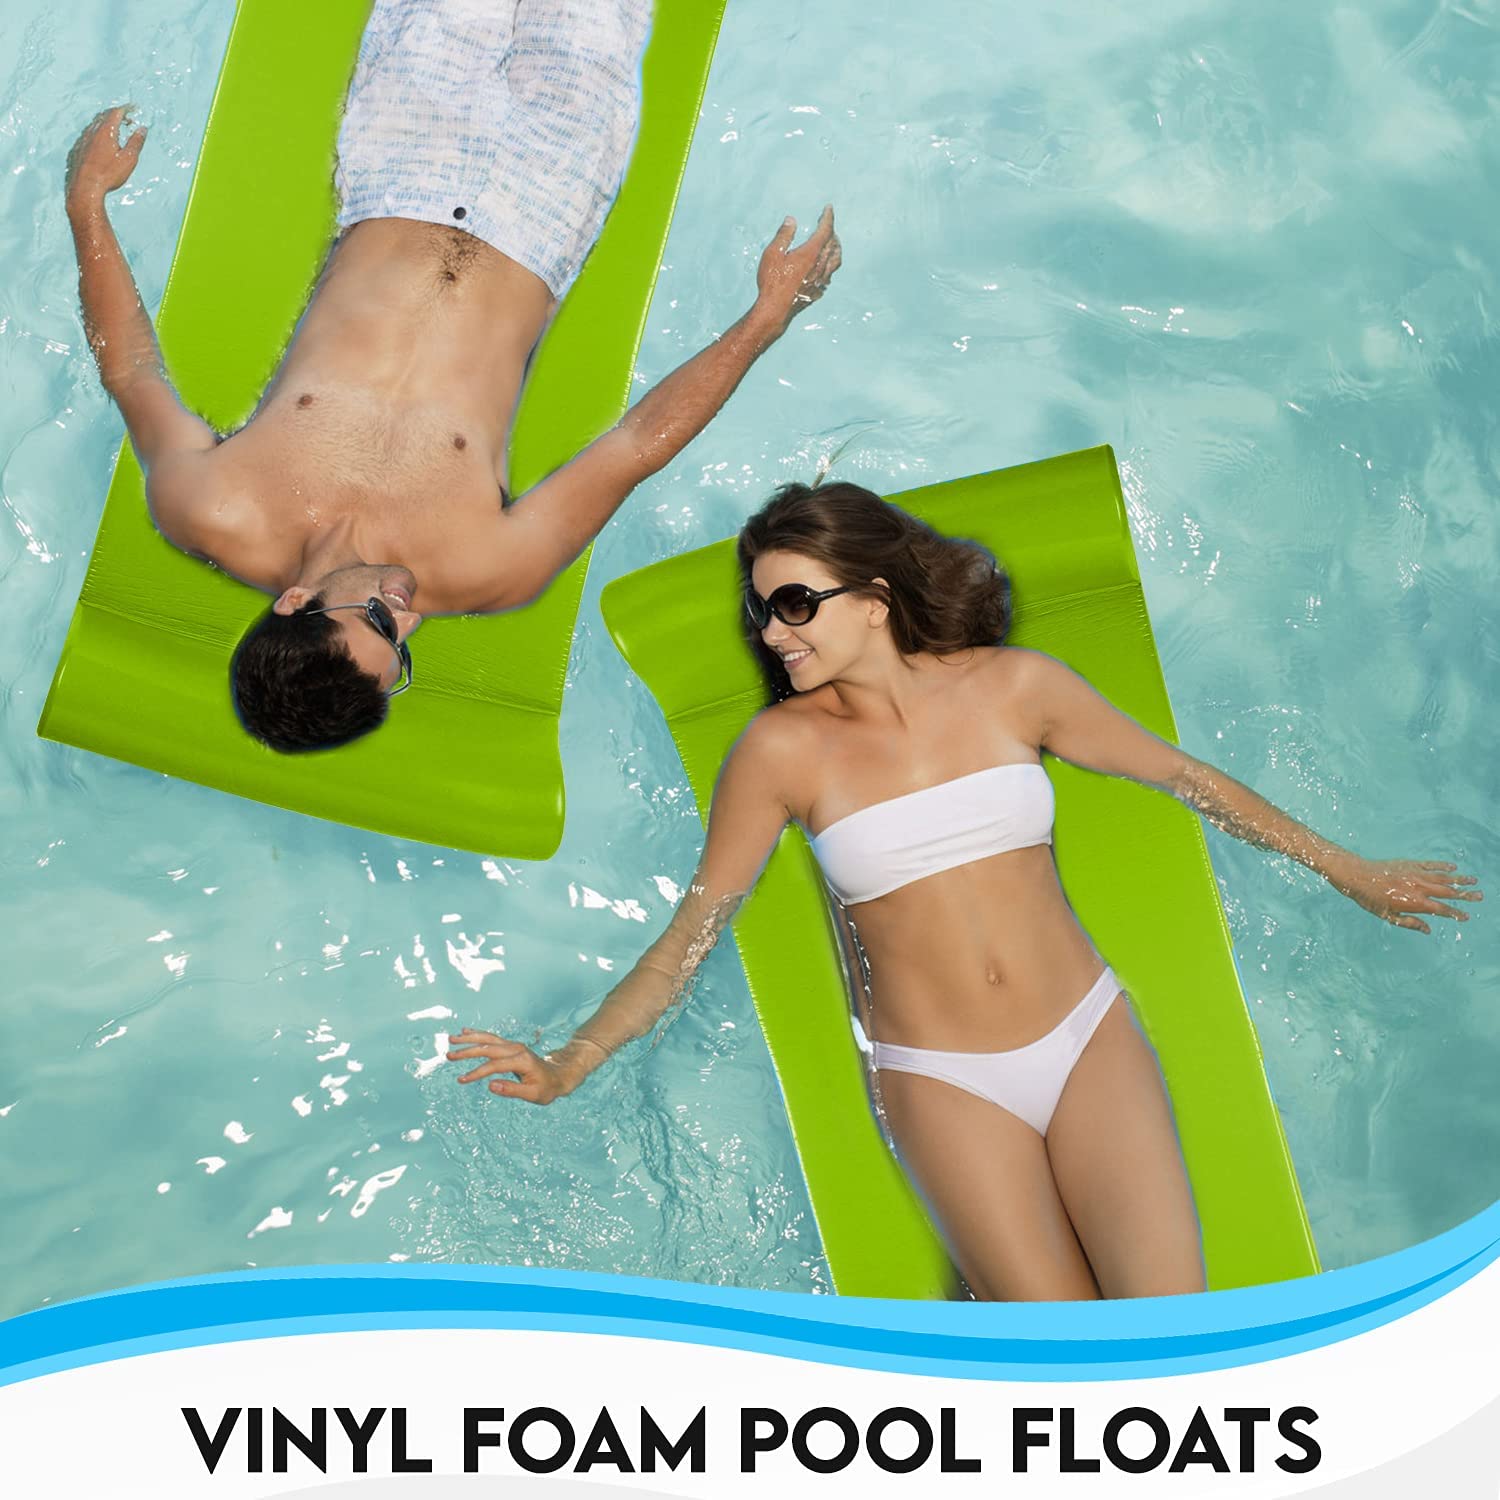 Cococabana First Class Vinyl Foam Pool Floats for Swimming and Floating, Lake Floats (Key Lime)…